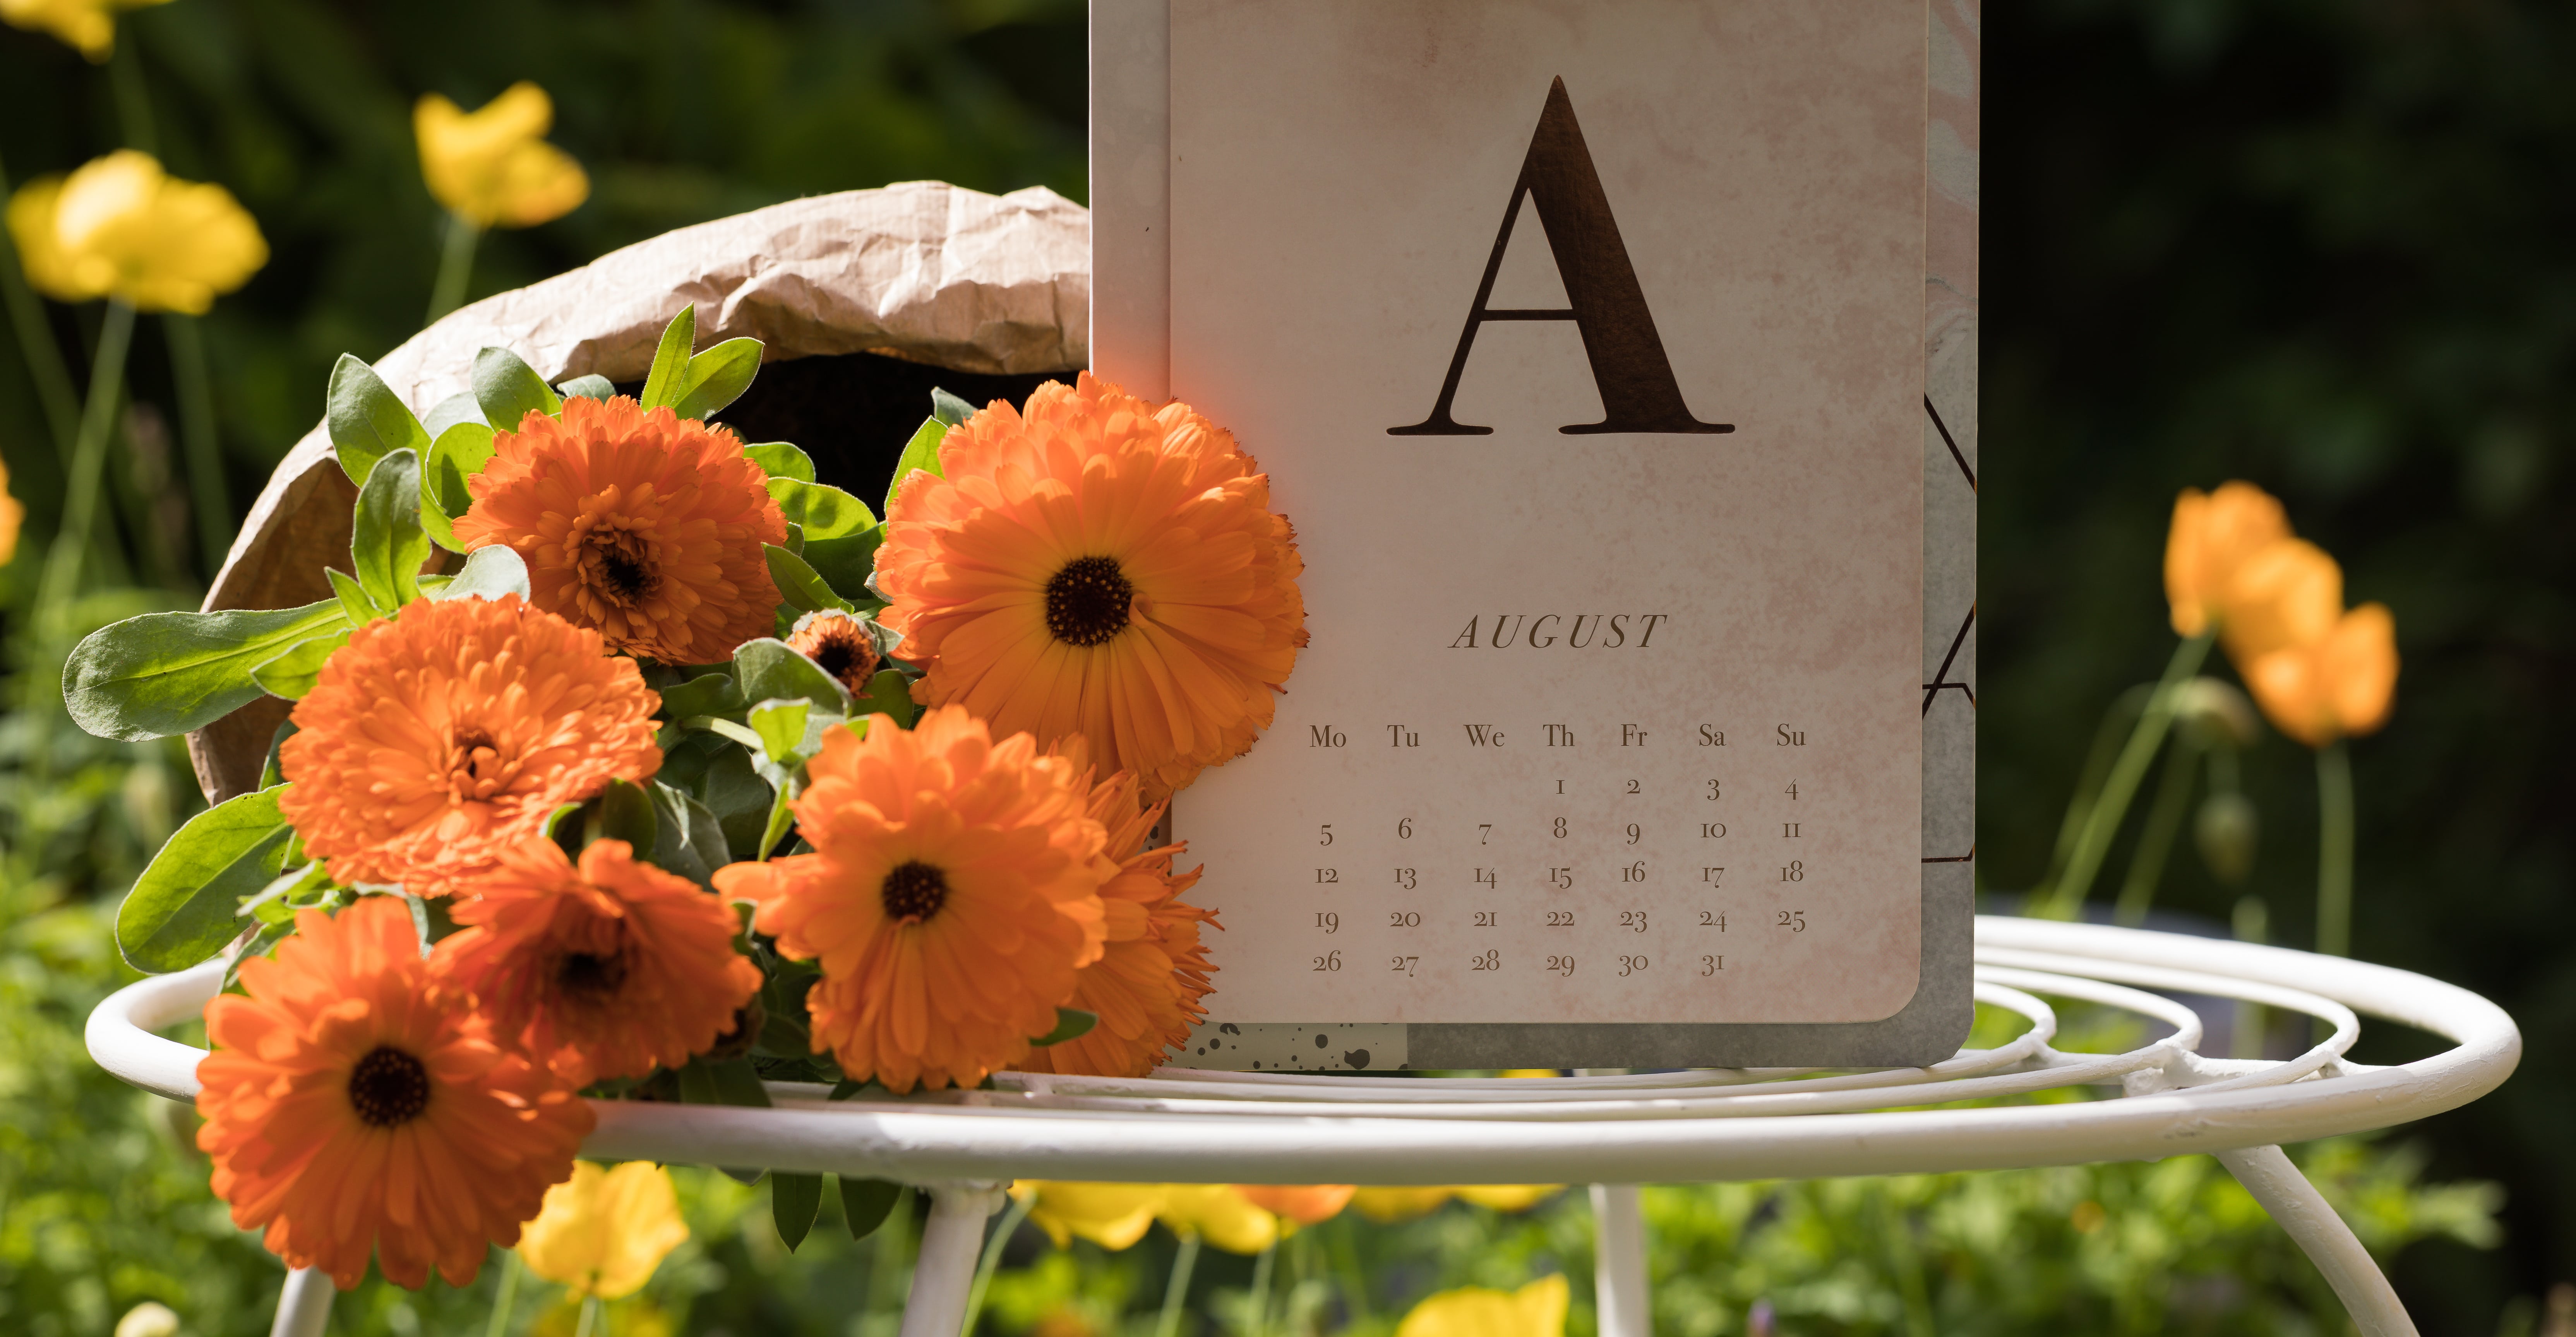 Close-up: Calendar of August and Beautiful Orange Flowers on Wrapping Paper are on Garden Table in Sunny Day. Horizontal Image. Concept: Summer Gardening.